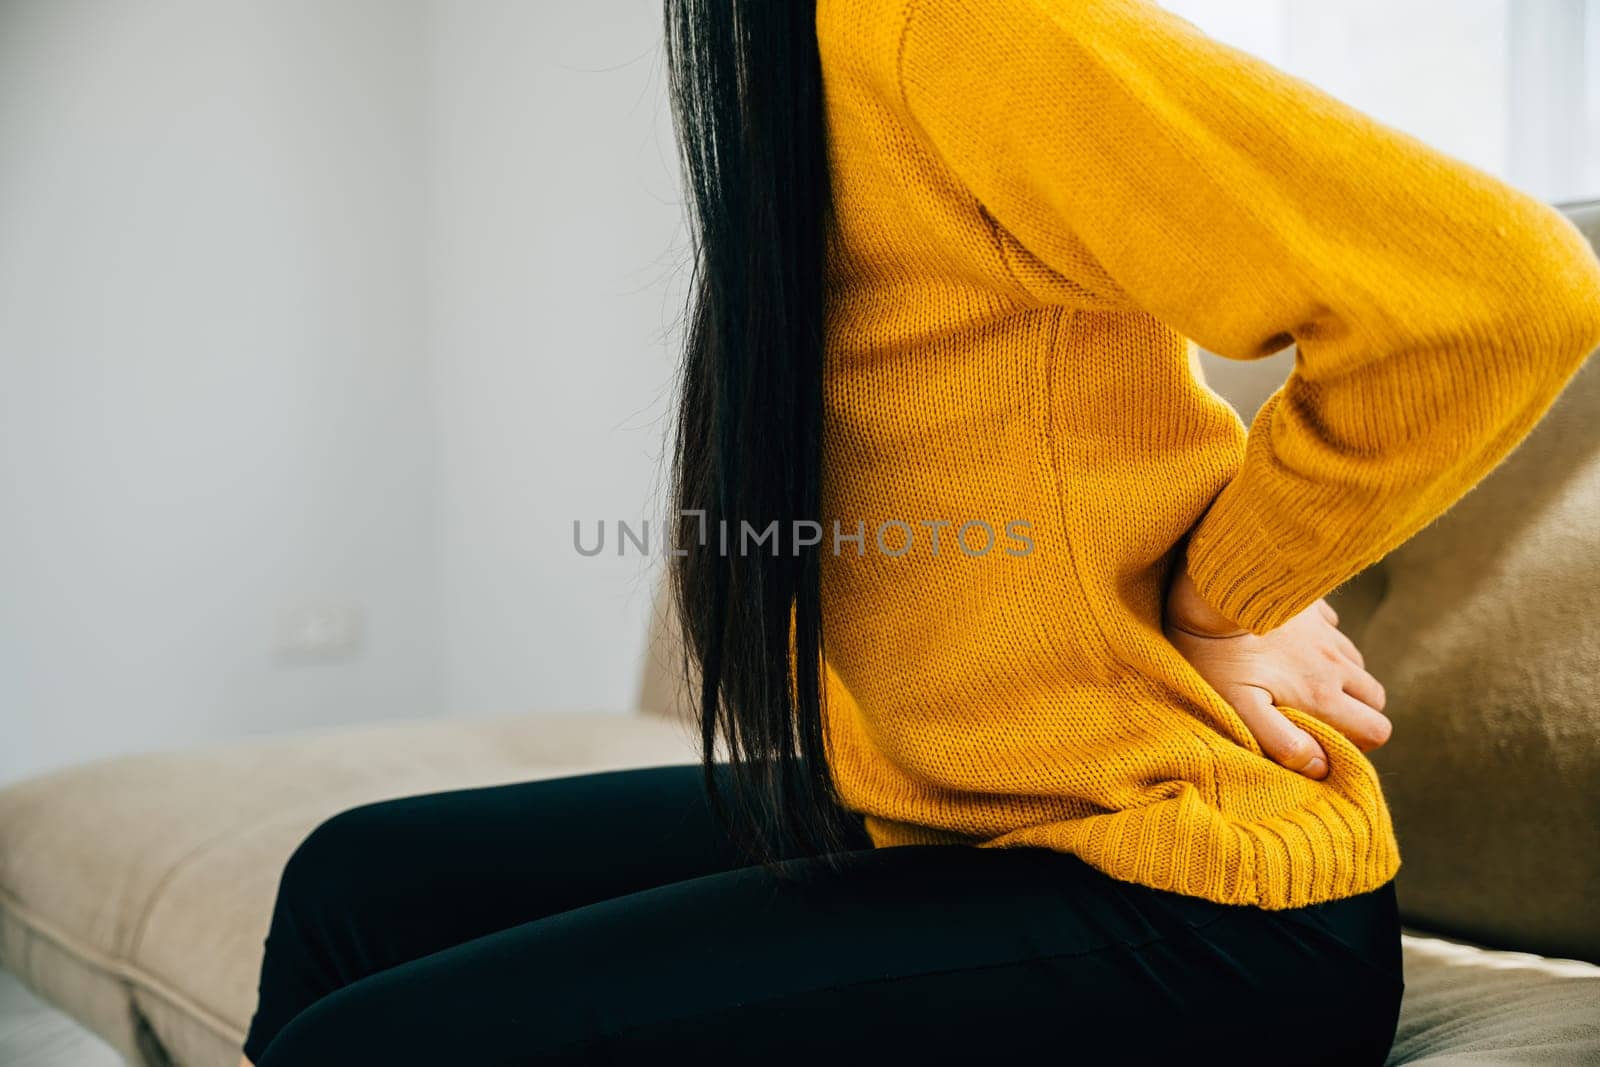 Highlighting unbearable back pain, Asian woman on sofa holds her lower back. Illustrating chronic backache discomfort and the need for medical care and attention. healthcare and problem concept